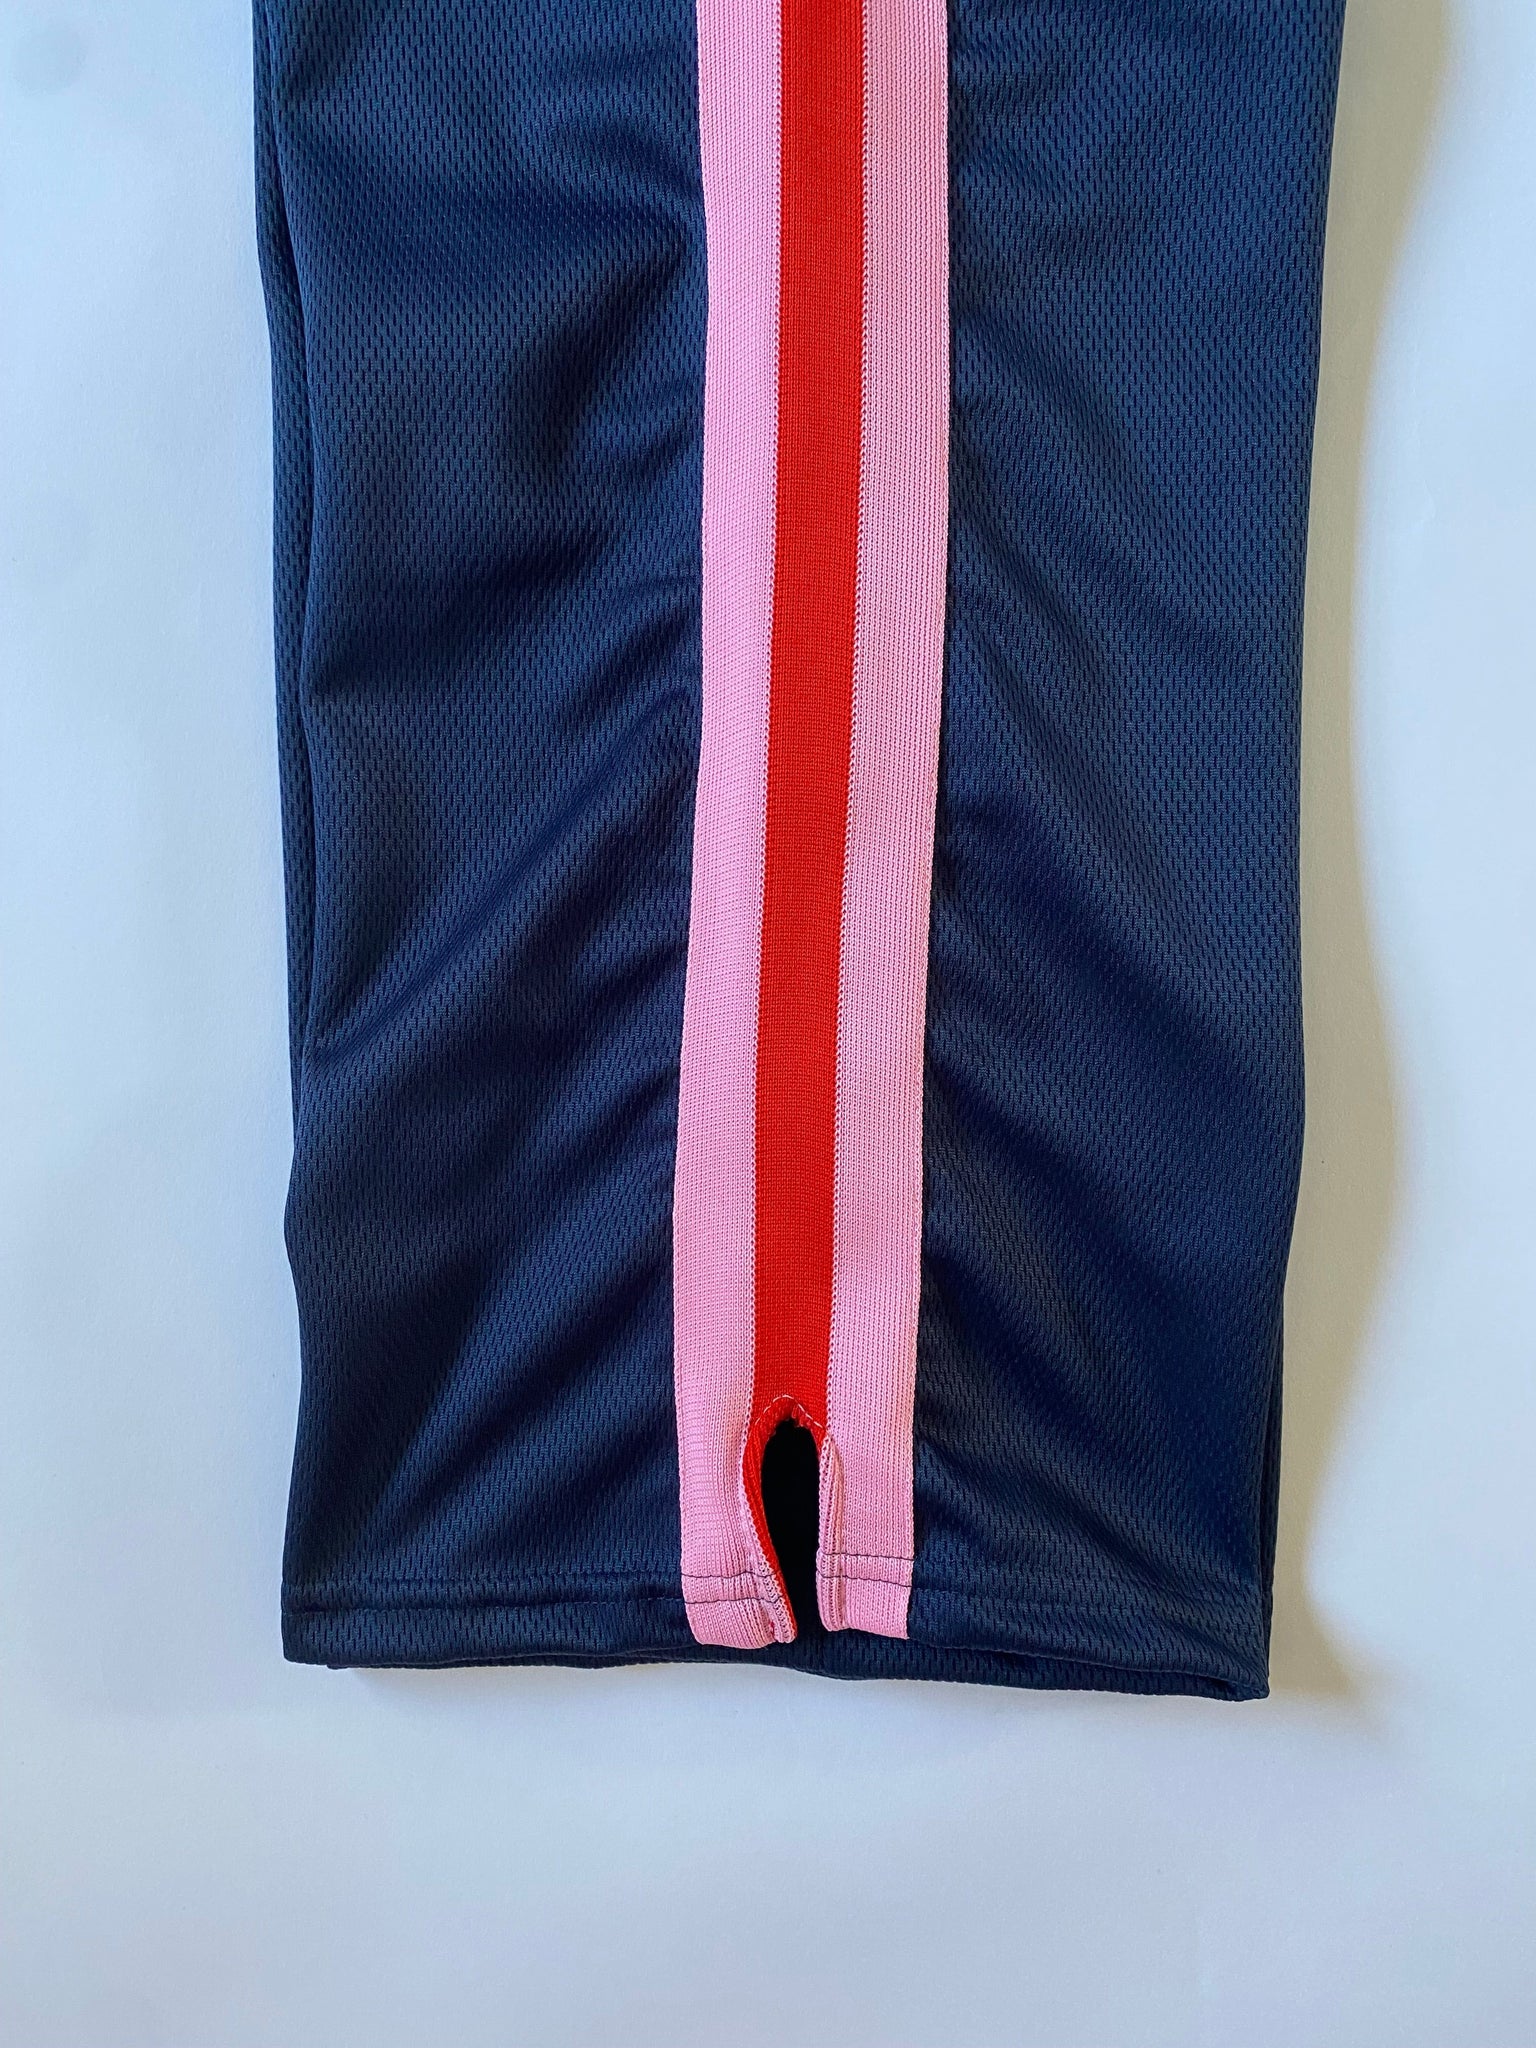 RLB LAX PANT in Navy Miracle Mesh* w/ pink, red, pink stripes